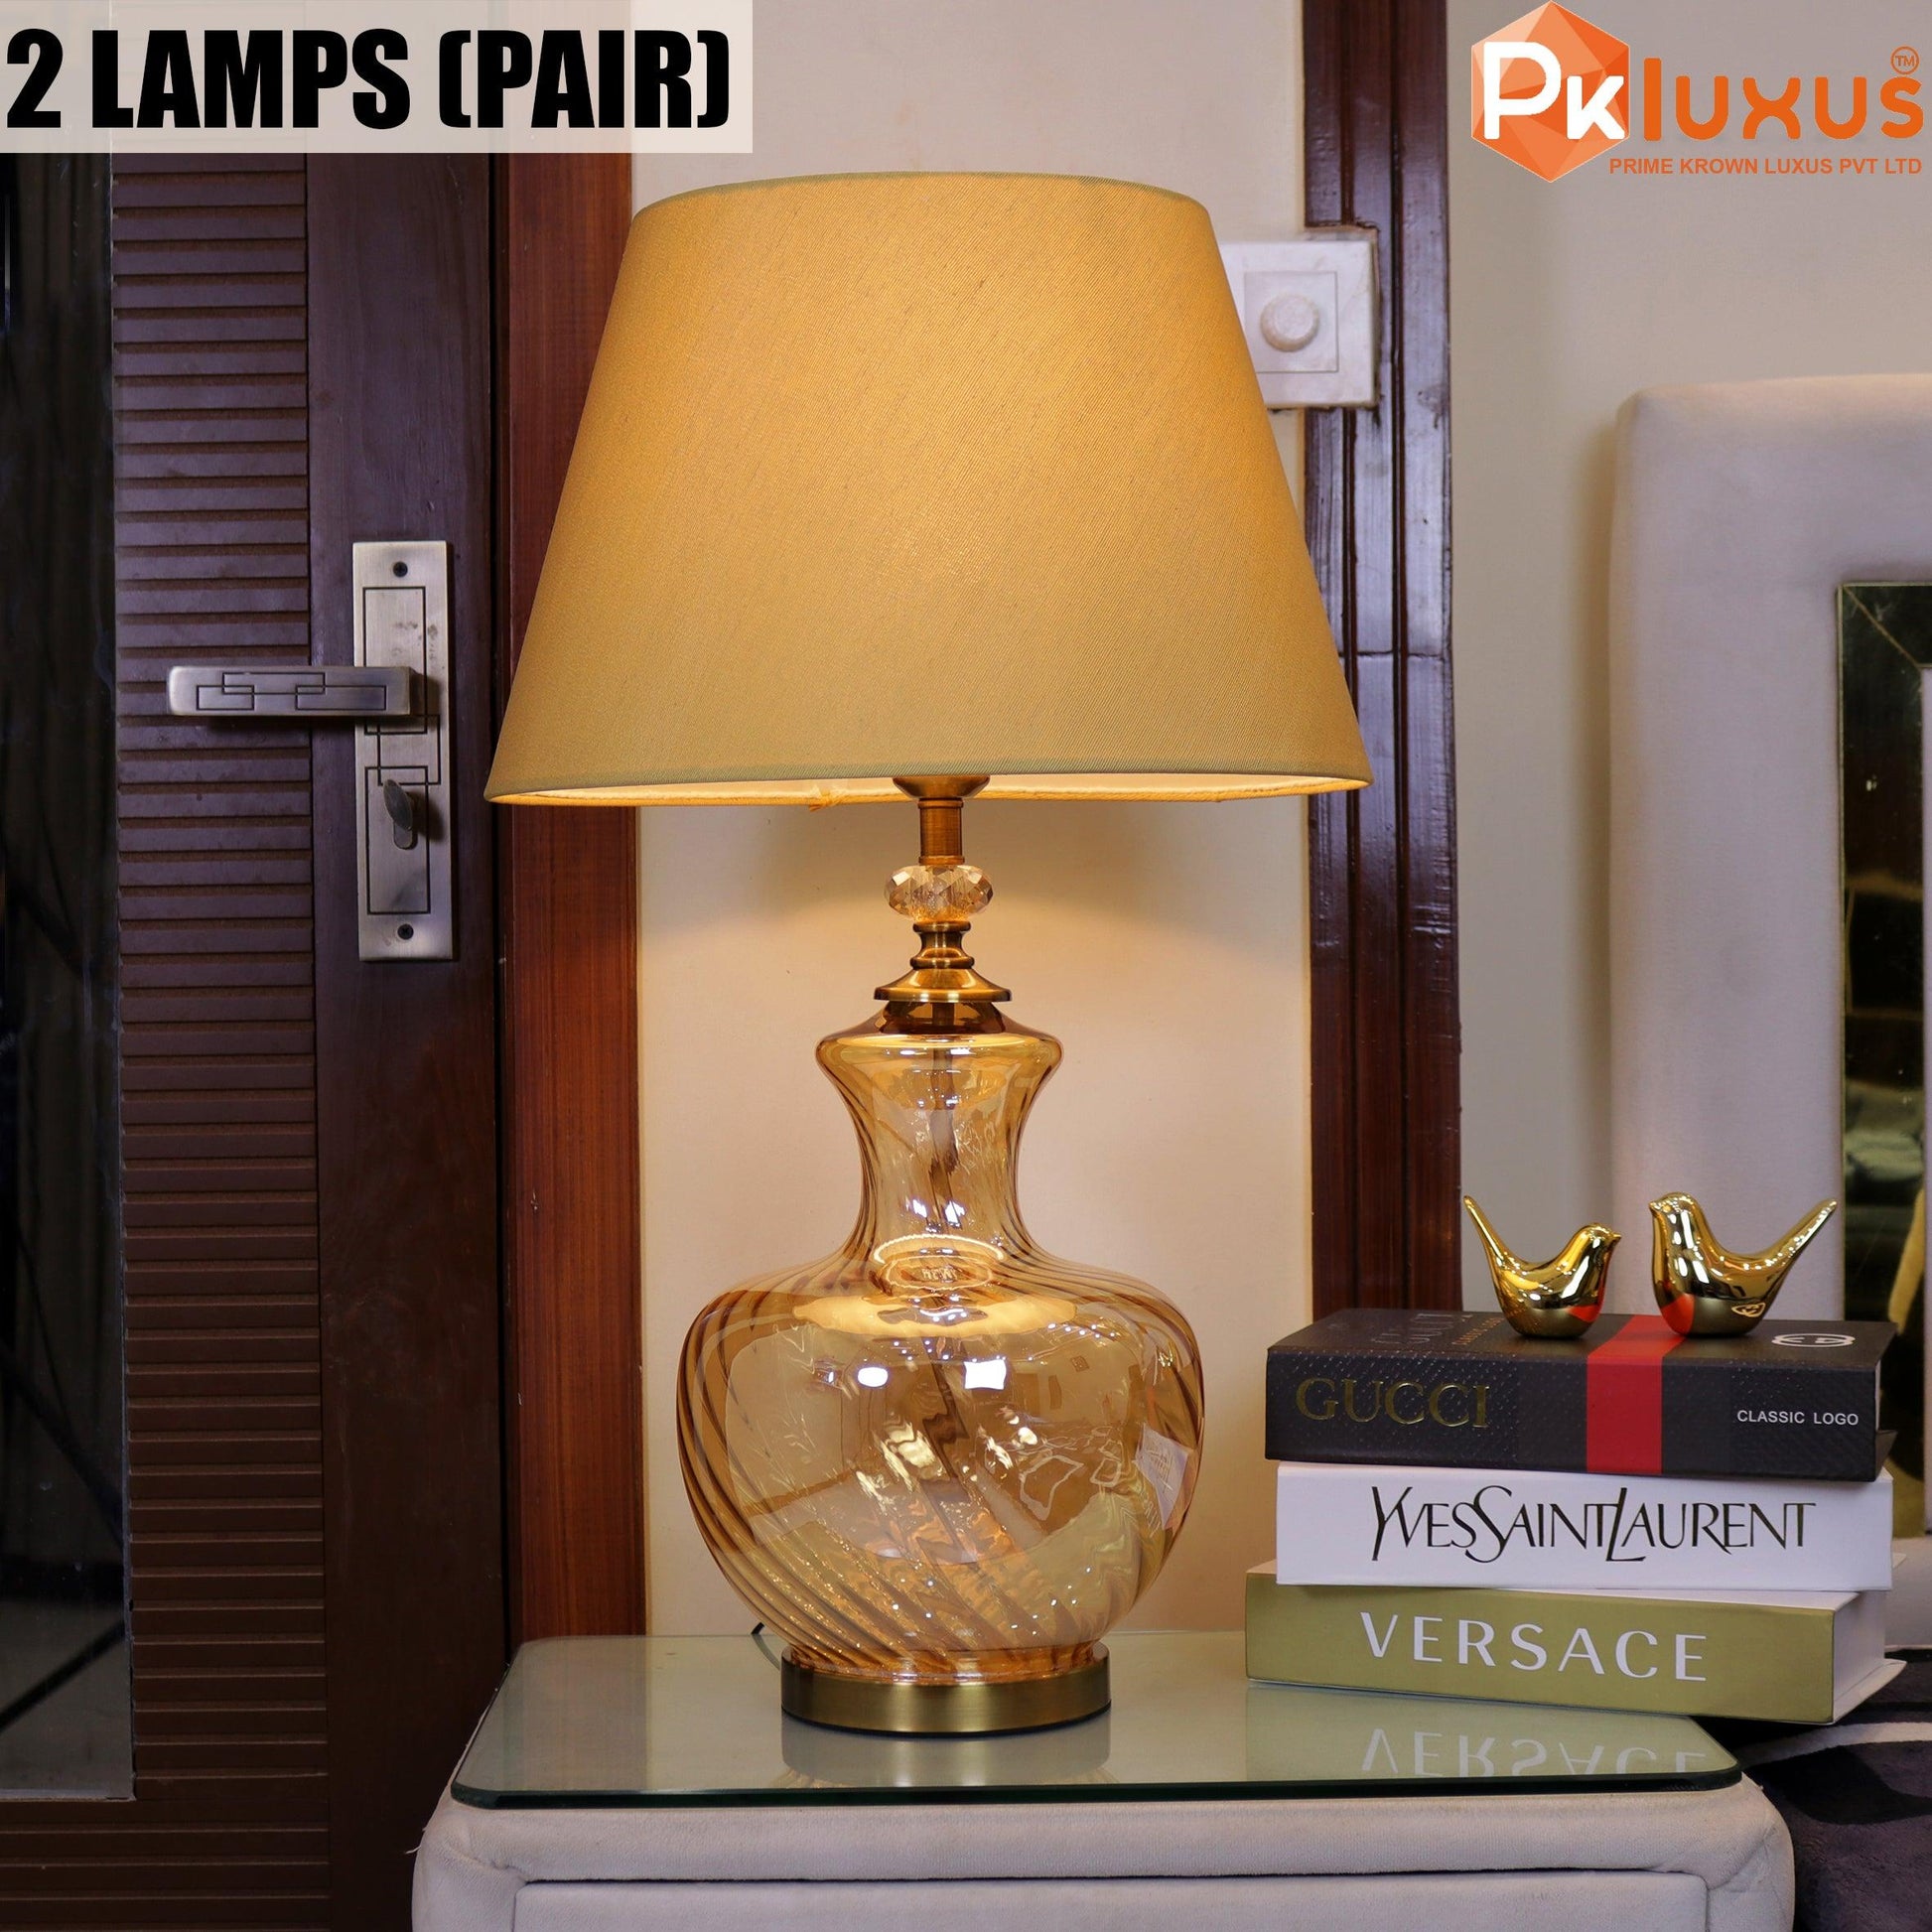 Luxury Gold Big Clay Pot Style Lamp With Golden Shade | PK LUXUS™ - PK LUXUS